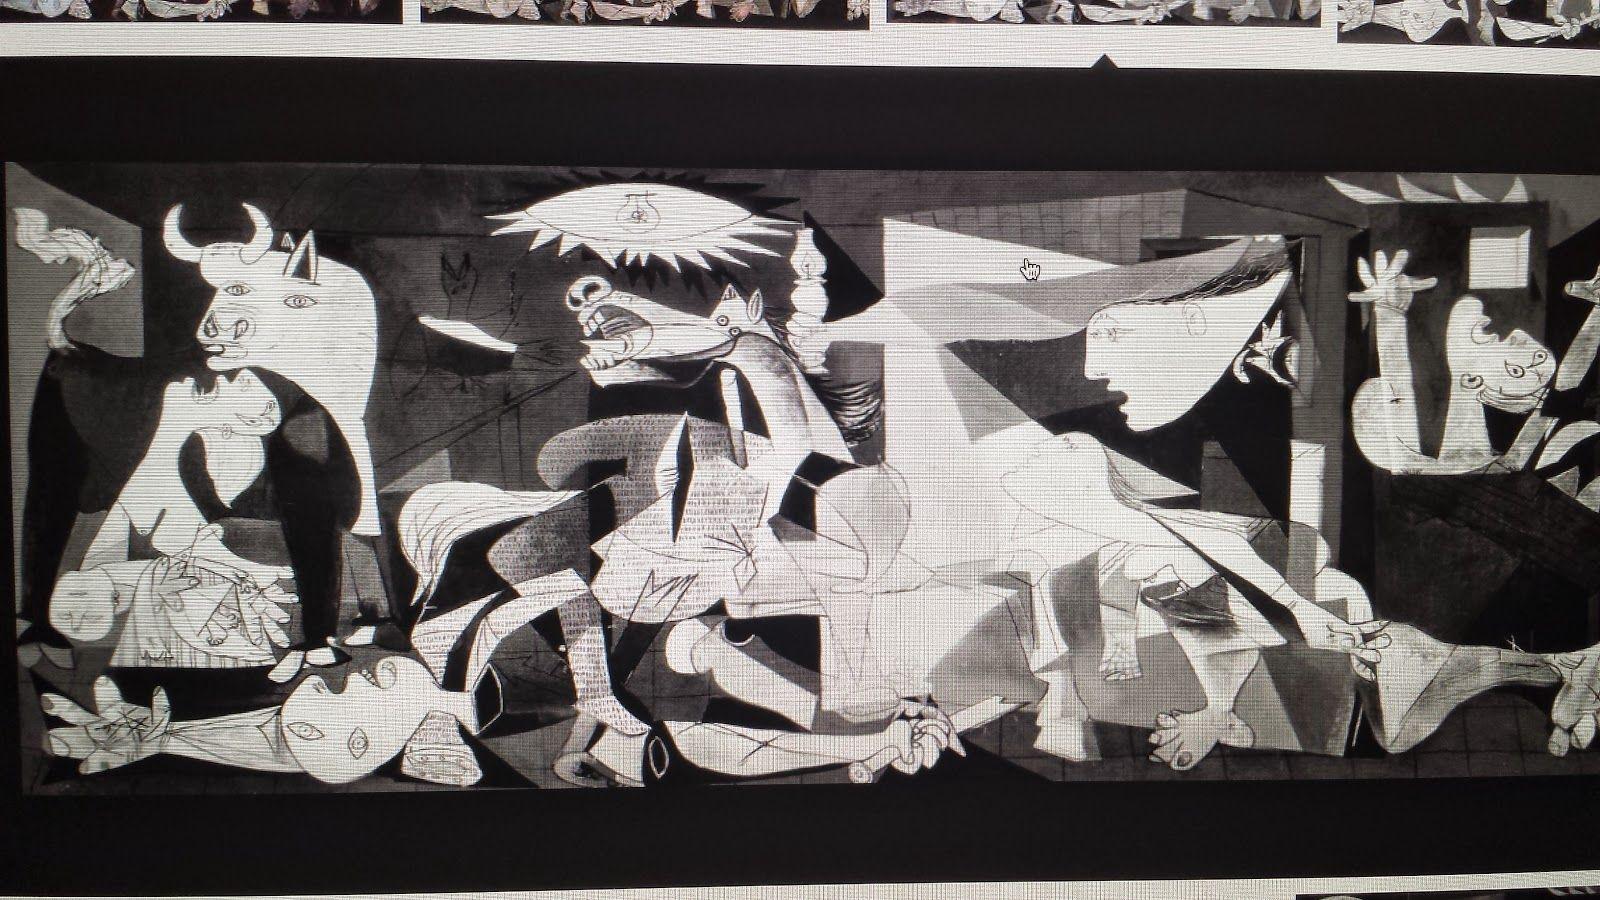 Humanities Period 4: Blog 3: Picasso's Guernica